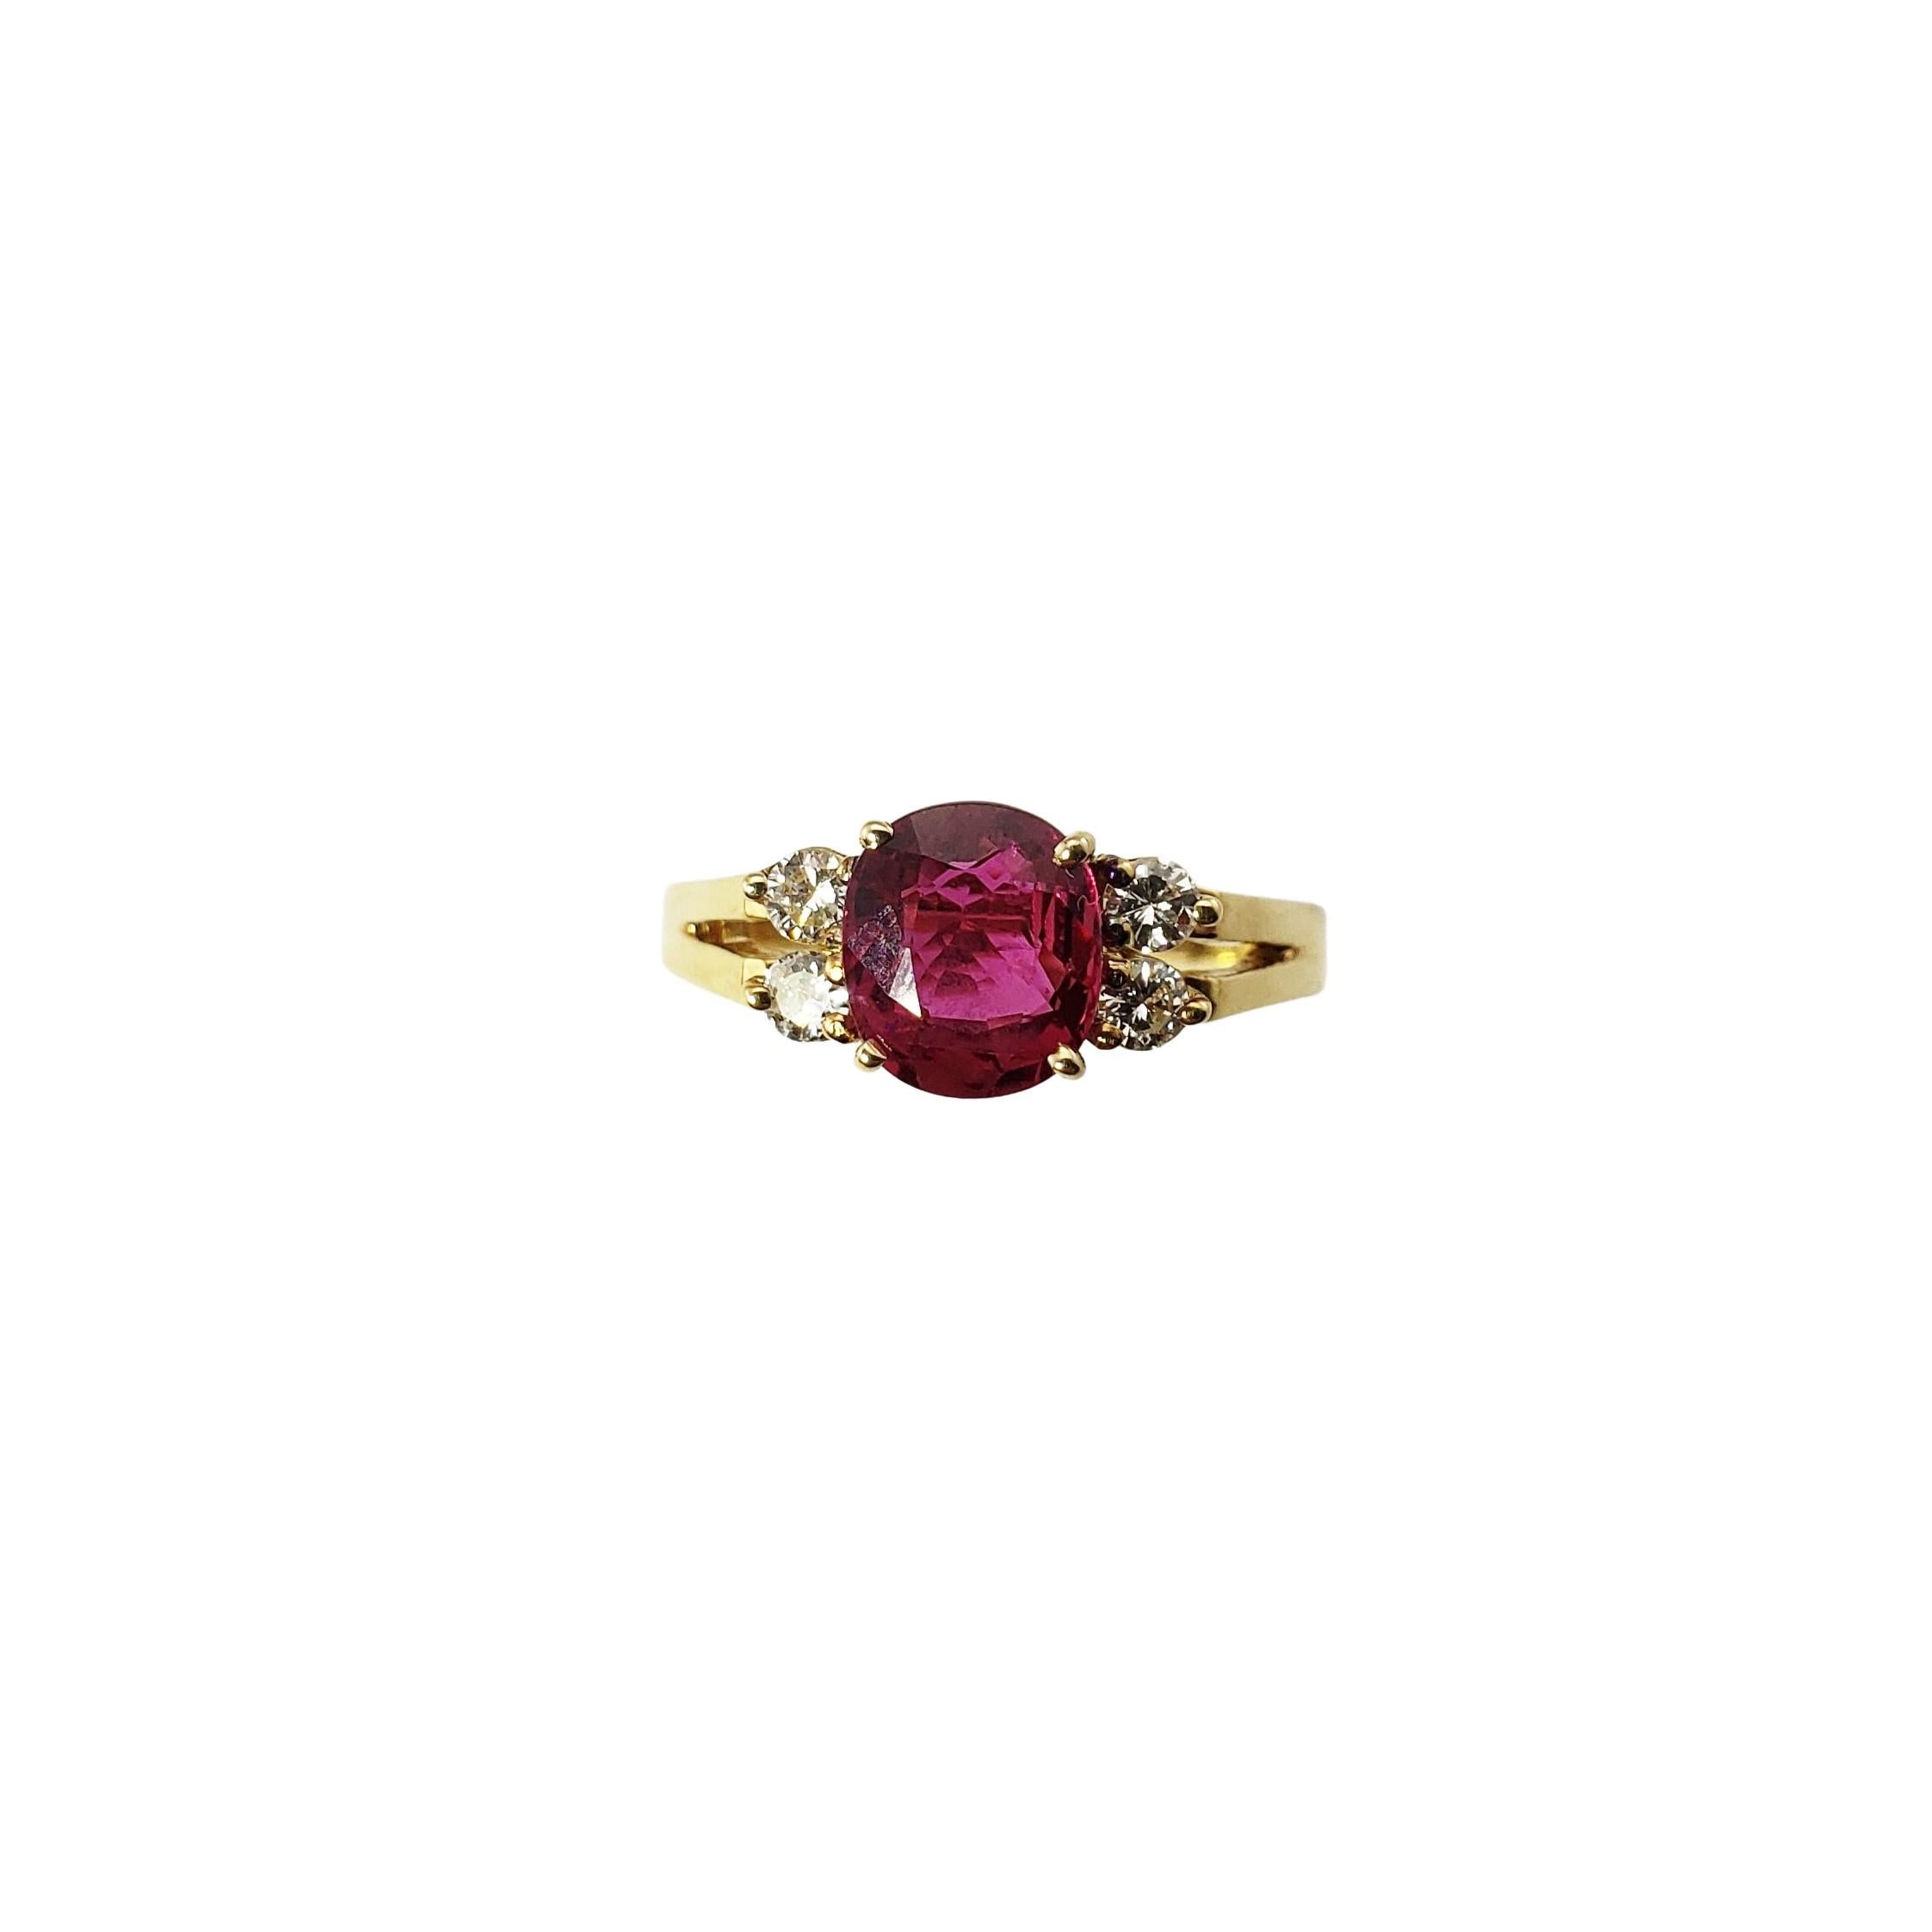 18 Karat Yellow Gold Ruby and Diamond Ring Size 4.75 GAI Certified-

This lovely ring feature one cushion cut ruby (6 mm) and four round brilliant cut diamonds set in classic 18K yellow gold. 

Ruby carat weight:  1.18 ct.

Total diamond weight: 